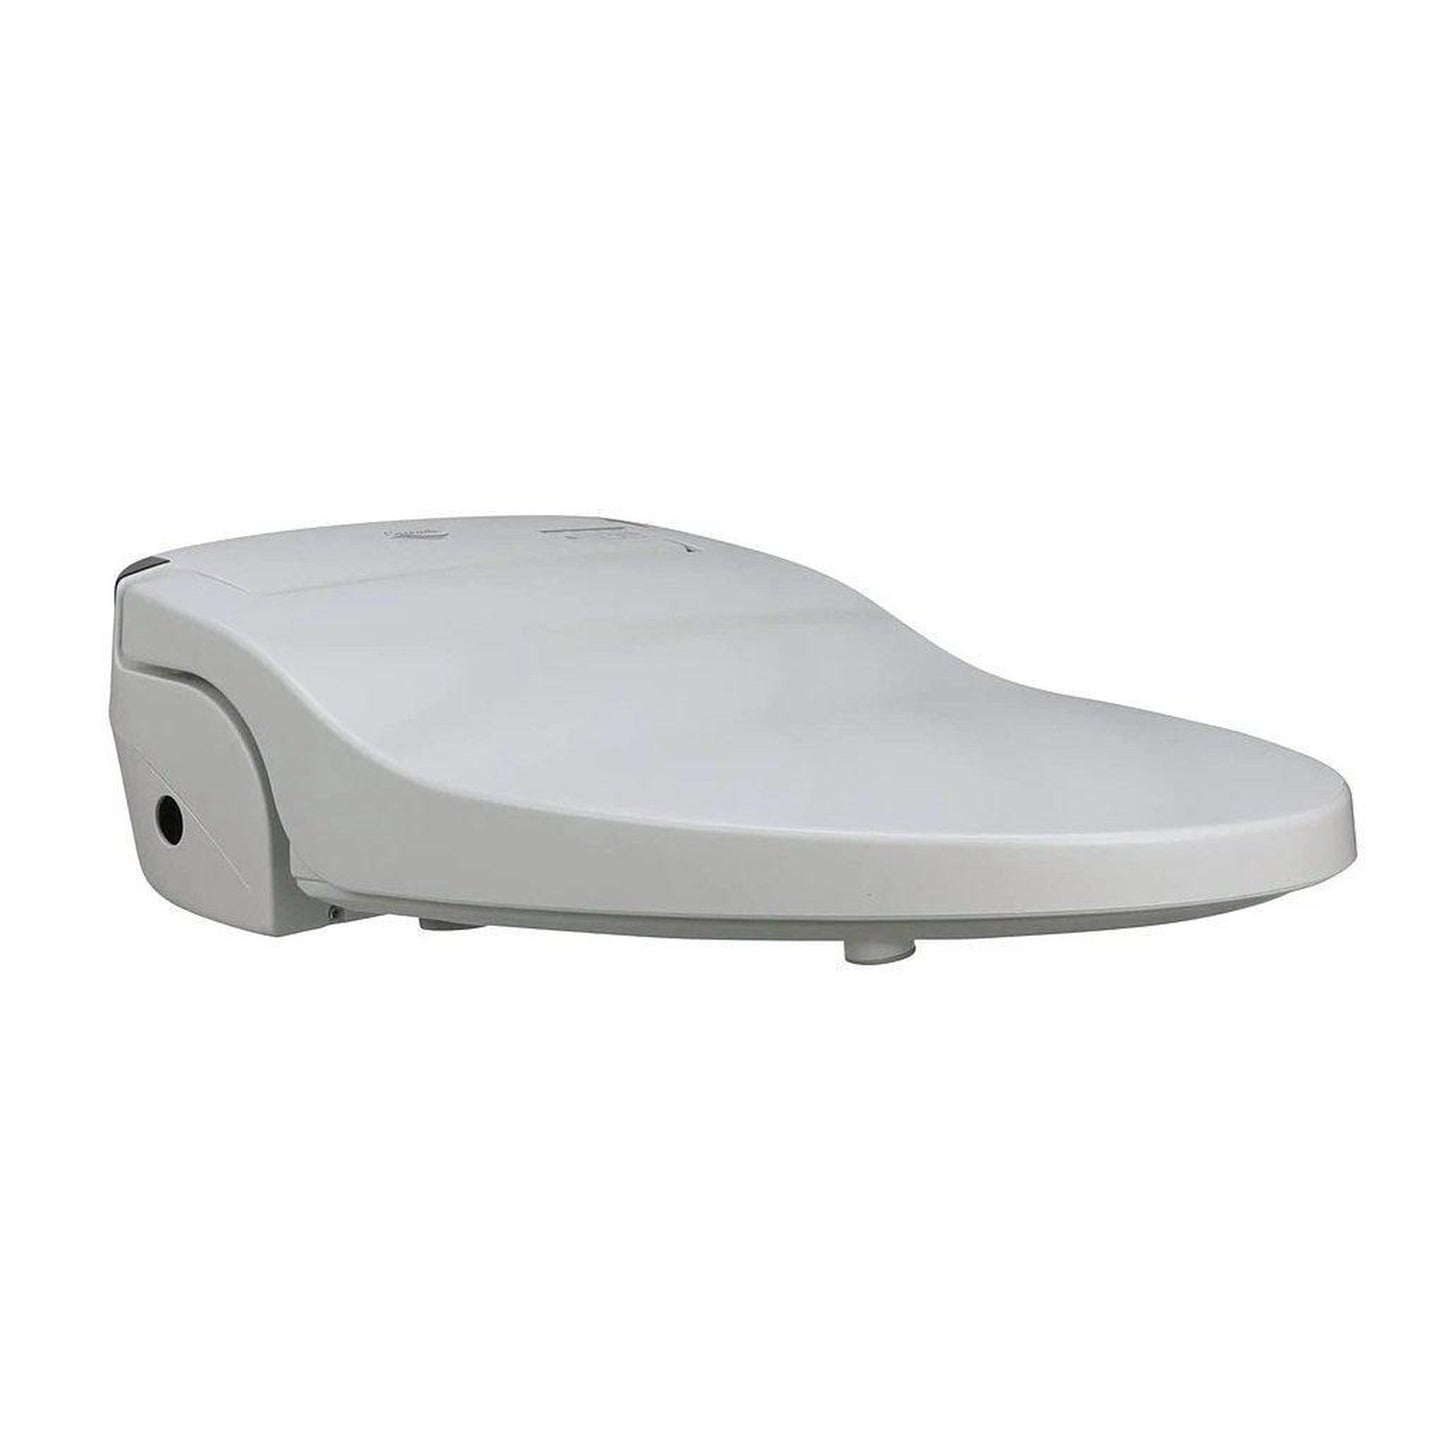 Dignity Solutions Cascade 3000 21" Elongated White Electric Bidet Toilet Seat With Small Remote Control